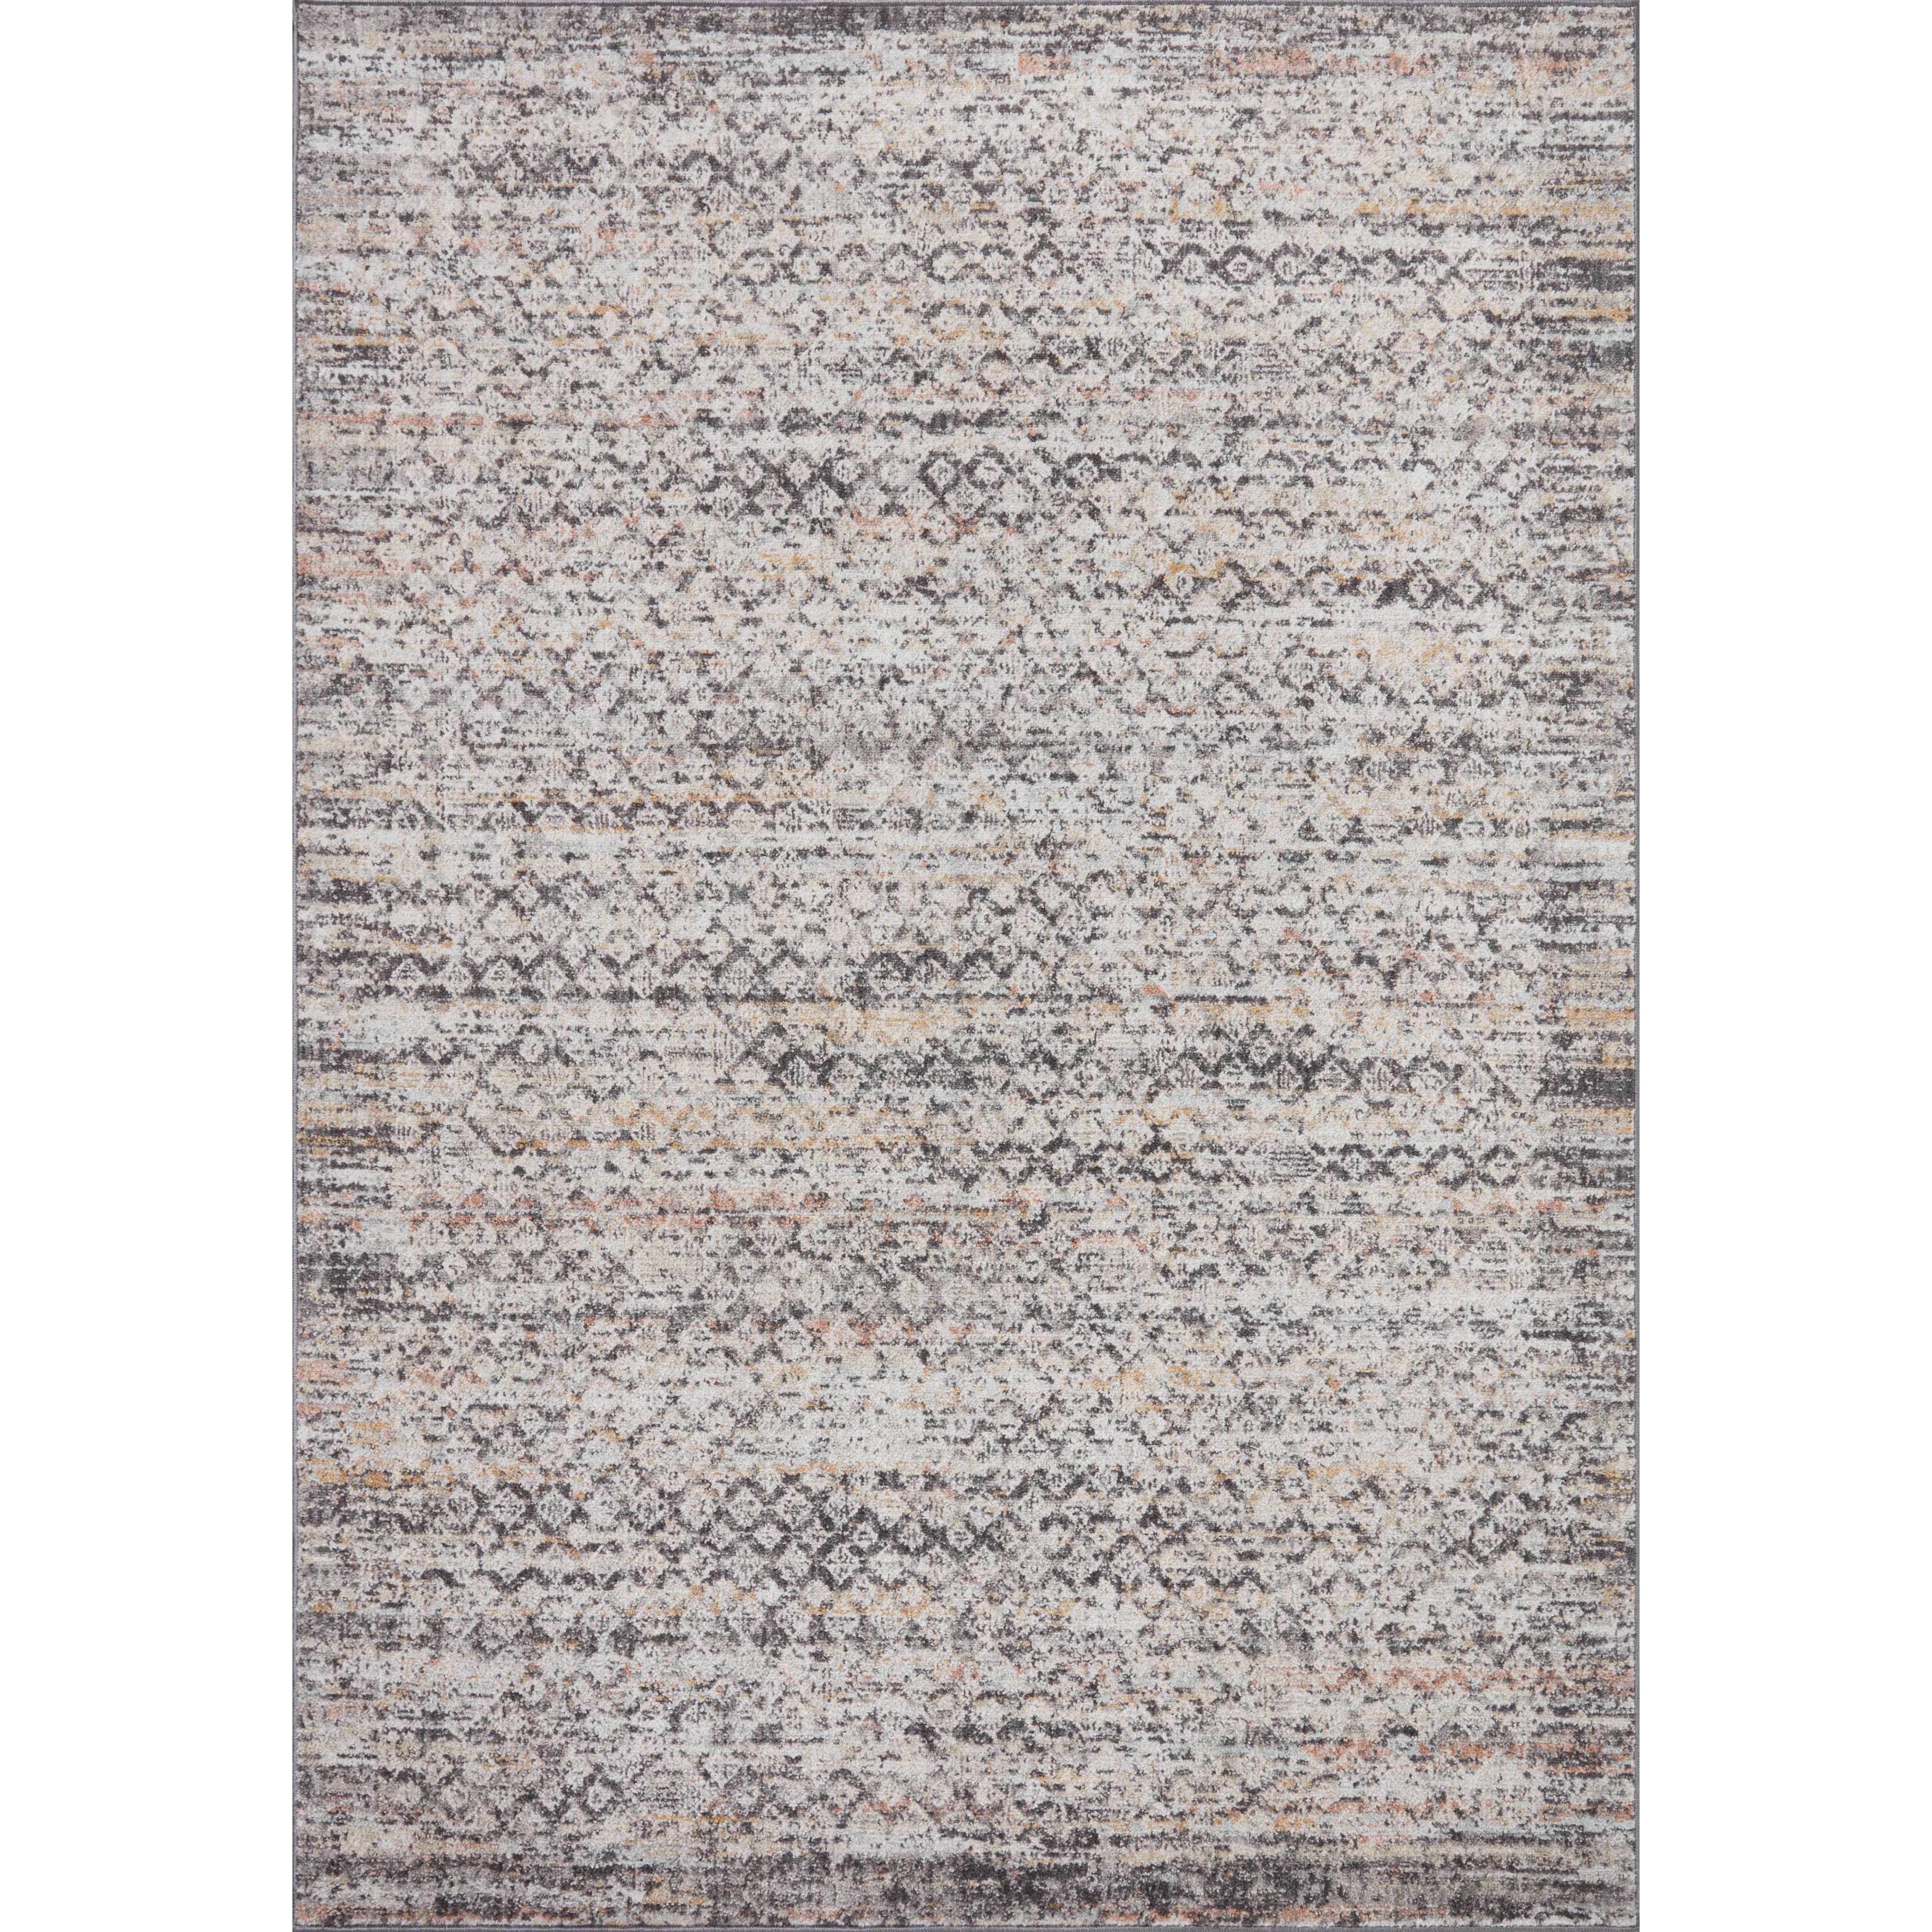 Inspired by antique Turkish Oushak carpets with large-scale motifs, the Monroe Grey / Multi Rug modernizes the traditional design in neutral palettes, many of which have black details that anchor the rug in the room. Monroe is power-loomed of 100% polypropylene for easy care and reliable durability. Amethyst Home provides interior design, new home construction design consulting, vintage area rugs, and lighting in the Kansas City metro area.